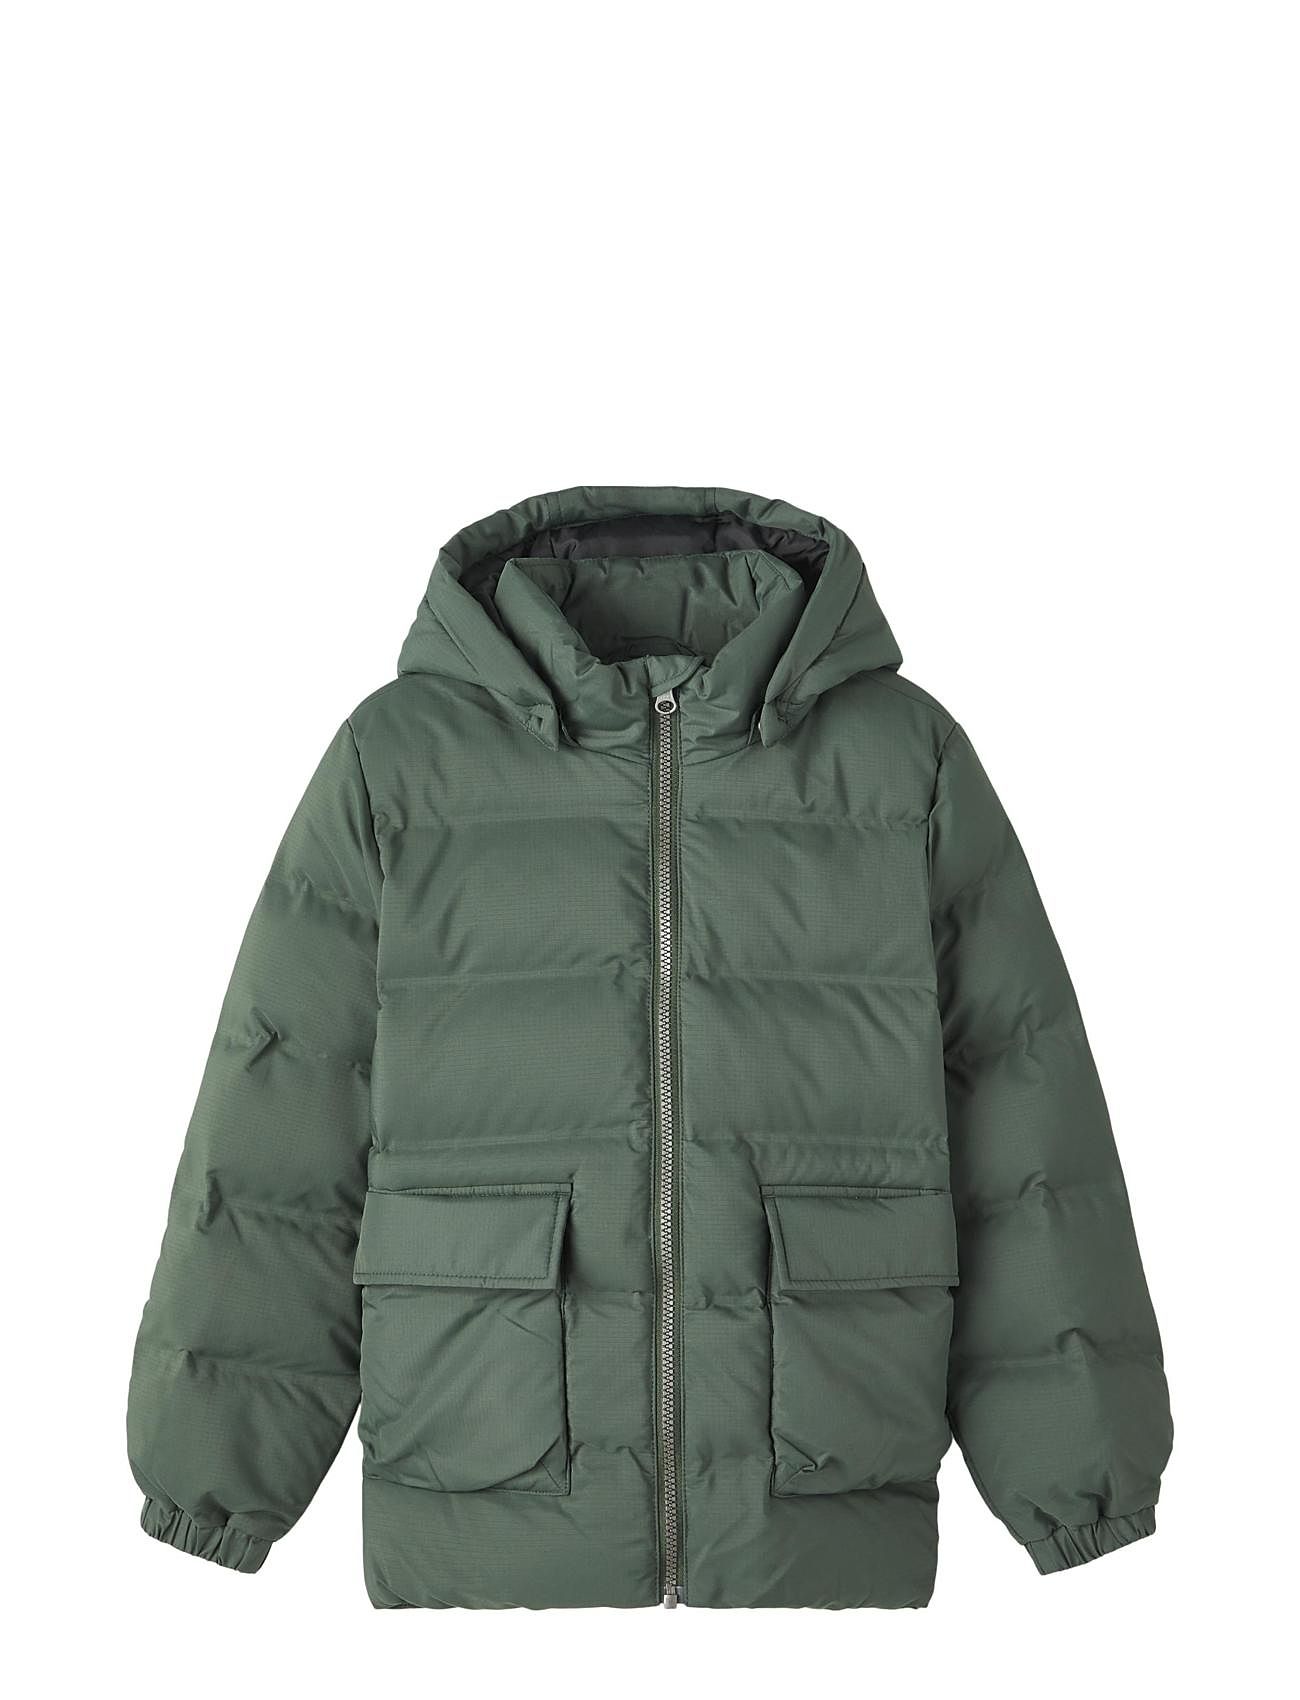 name it Nkmmellow Puffer Jacket Tb - 22.50 €. Buy Puffer & Padded from name  it online at Boozt.com. Fast delivery and easy returns